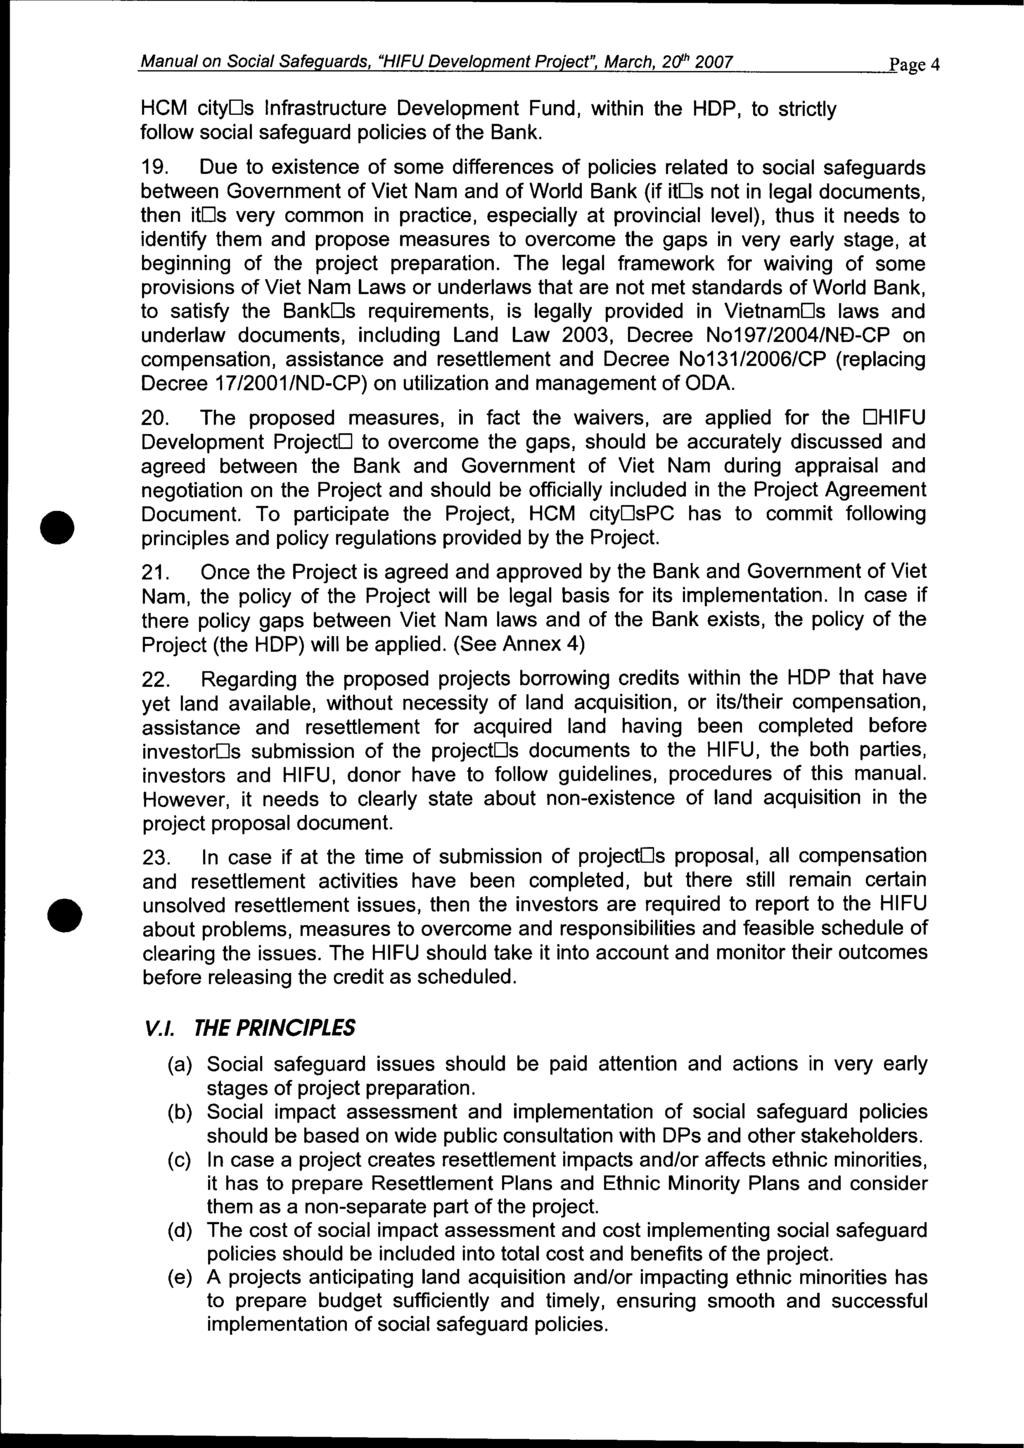 Manual on Social Safeguards, "HIFU Development Project", March, 20h 2007 Page 4 HCM cityos Infrastructure Development Fund, within the HDP, to strictly follow social safeguard policies of the Bank.